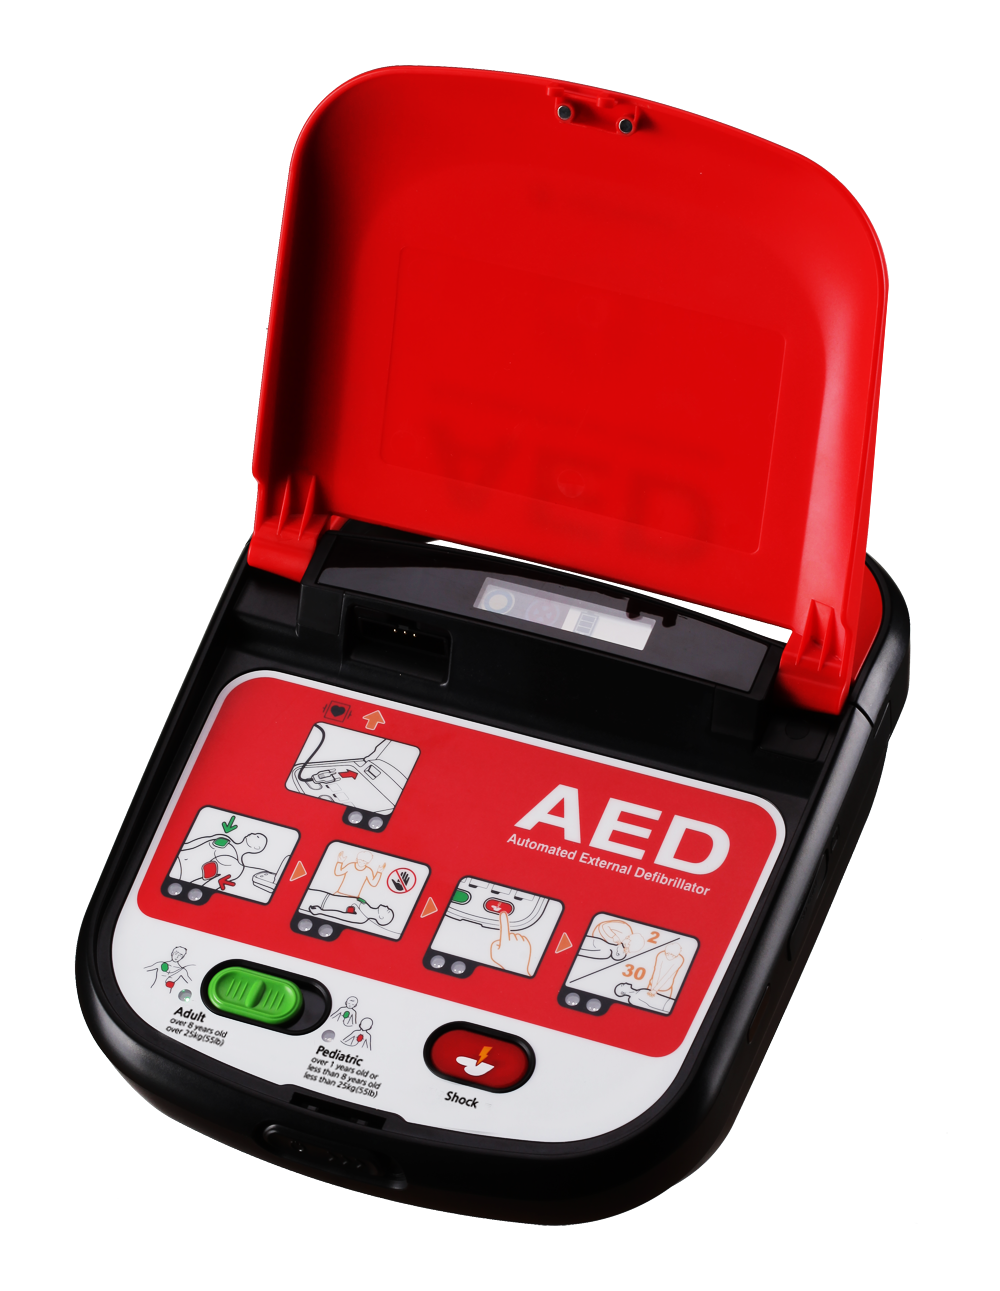 Mediana A15 Adult/Child Defibrillator Package | No Wall Cabinet Save $80